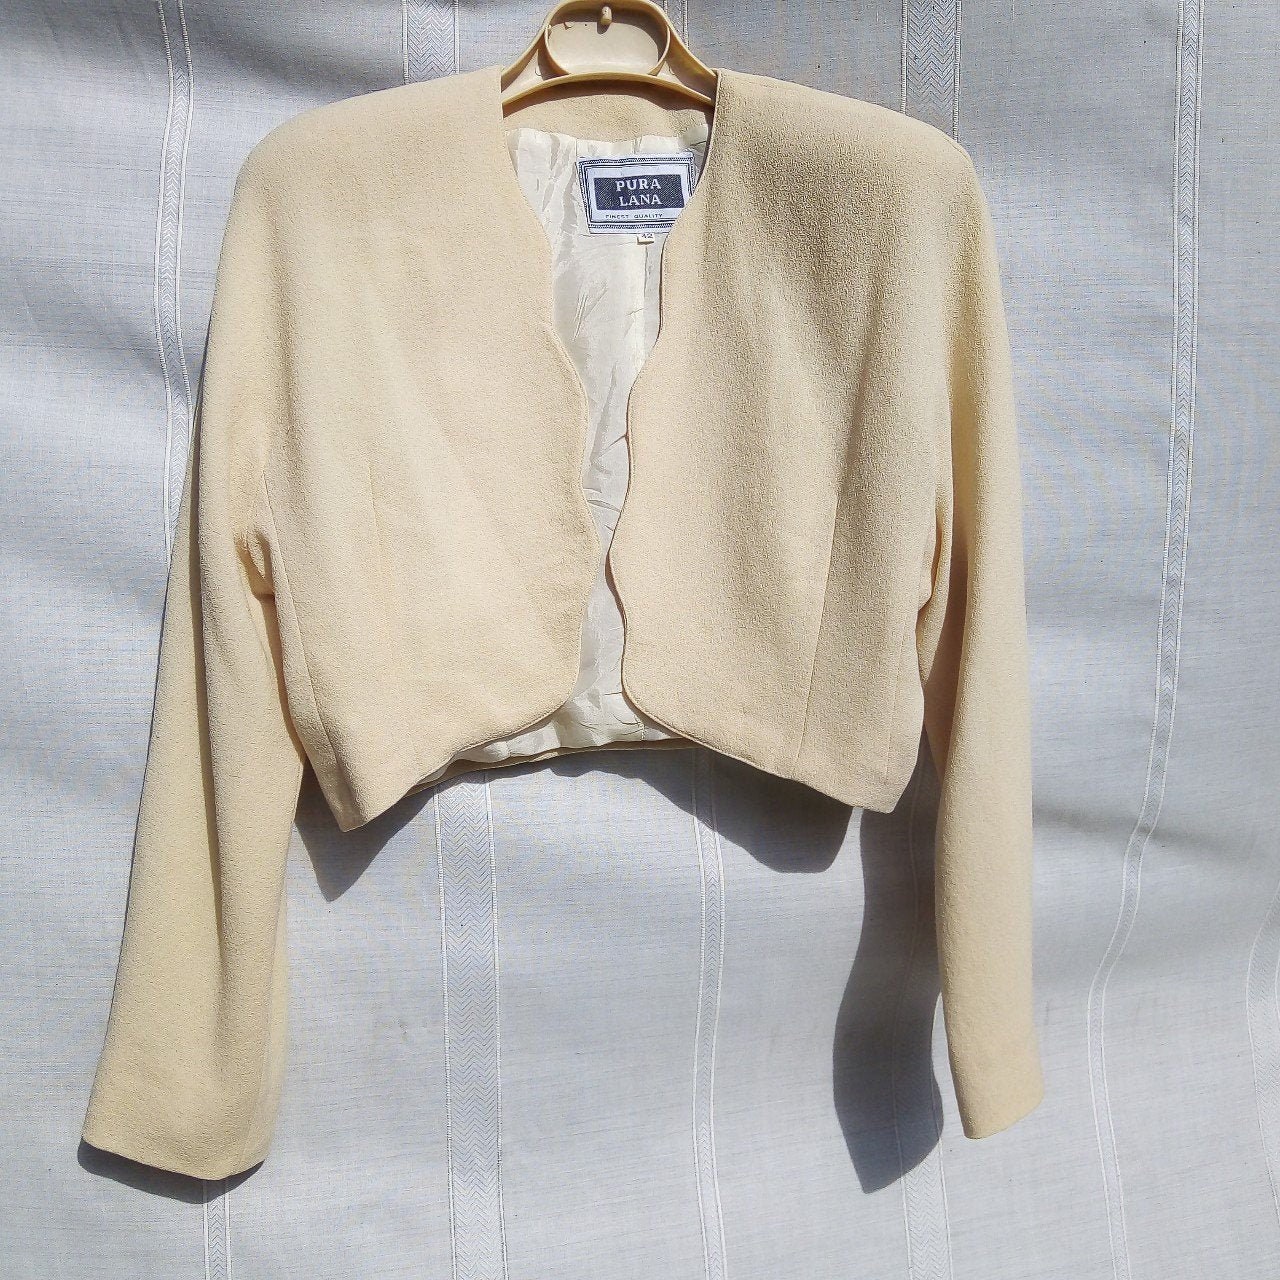 VINTAGE IVORY BOLERO 80s Made in Italy Finest Quality Bolero of the 80s in Pure Wool